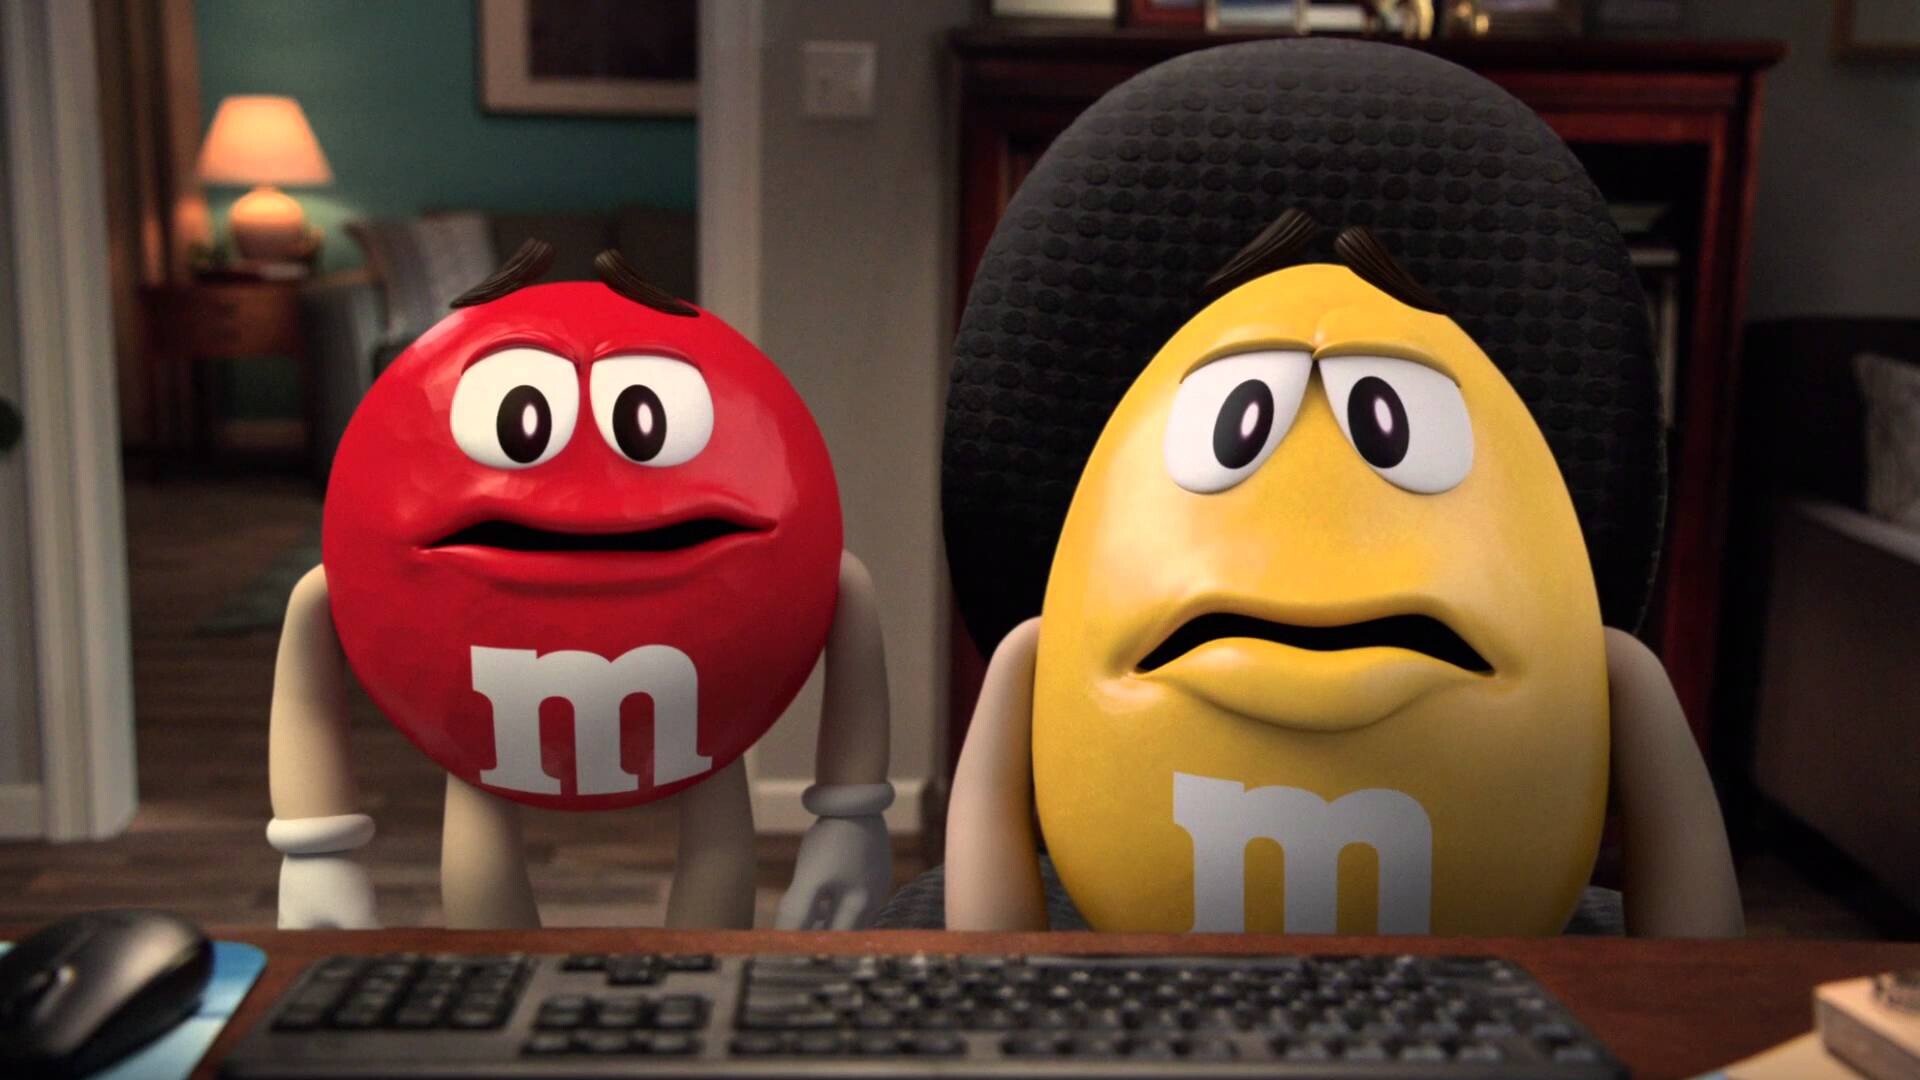 M&M’s: The snack-sized pieces of chocolate in a colorful candy shell. 1920x1080 Full HD Wallpaper.